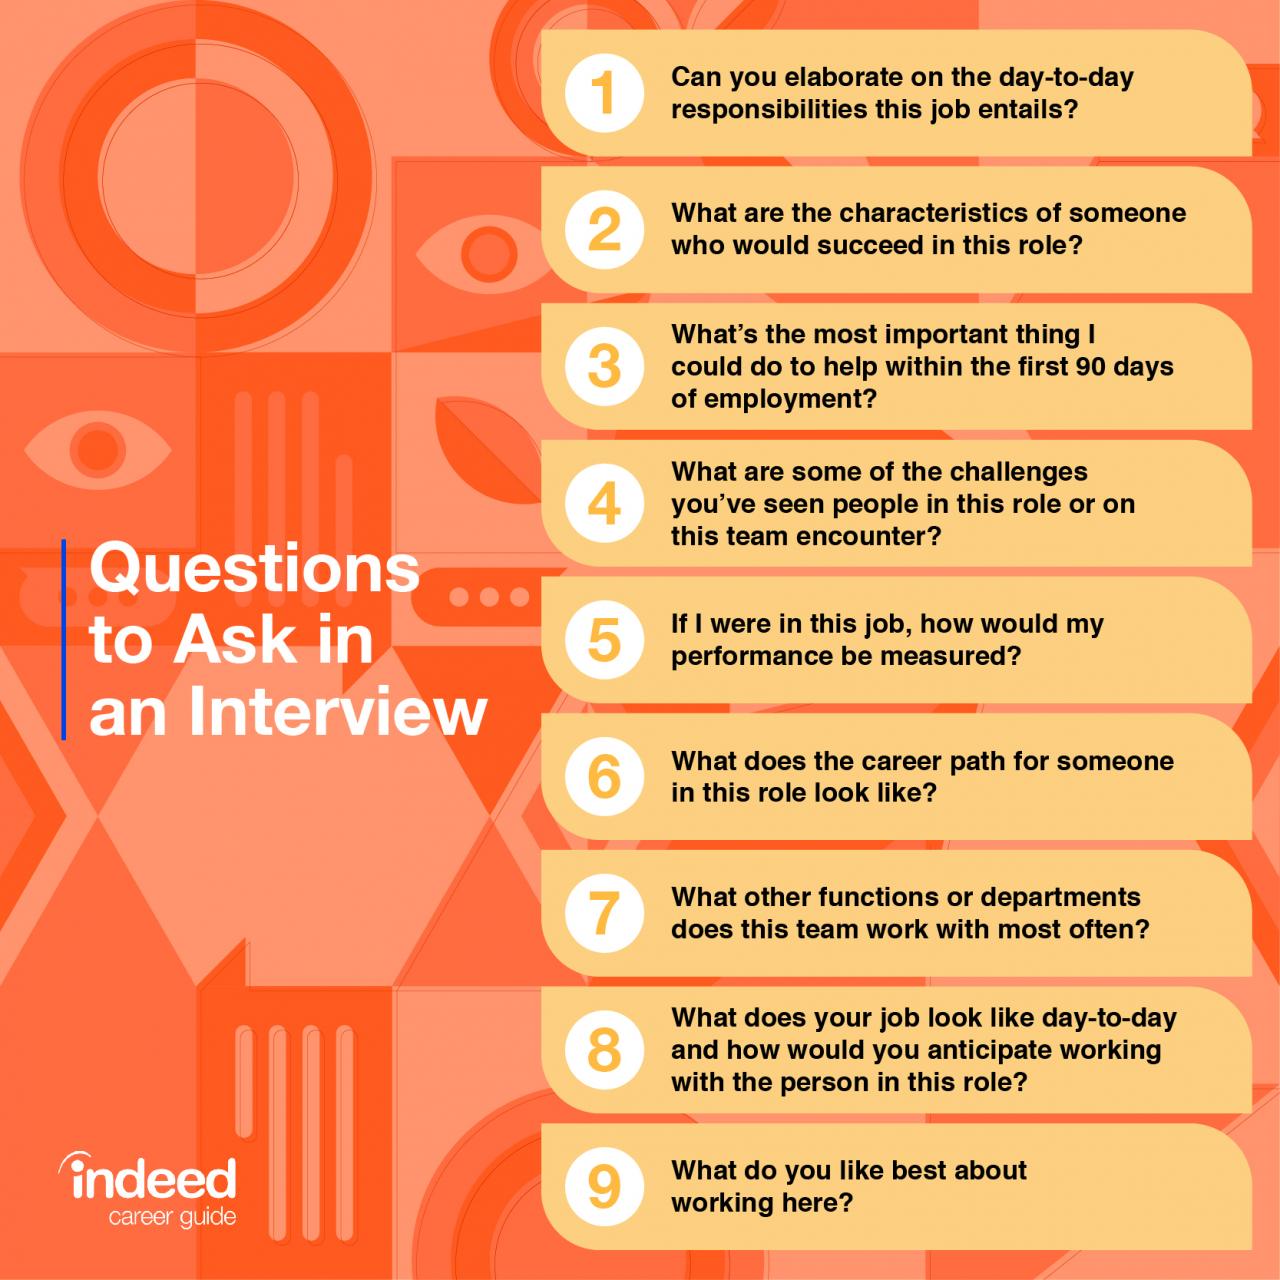 Good questions to ask doctors in an interview